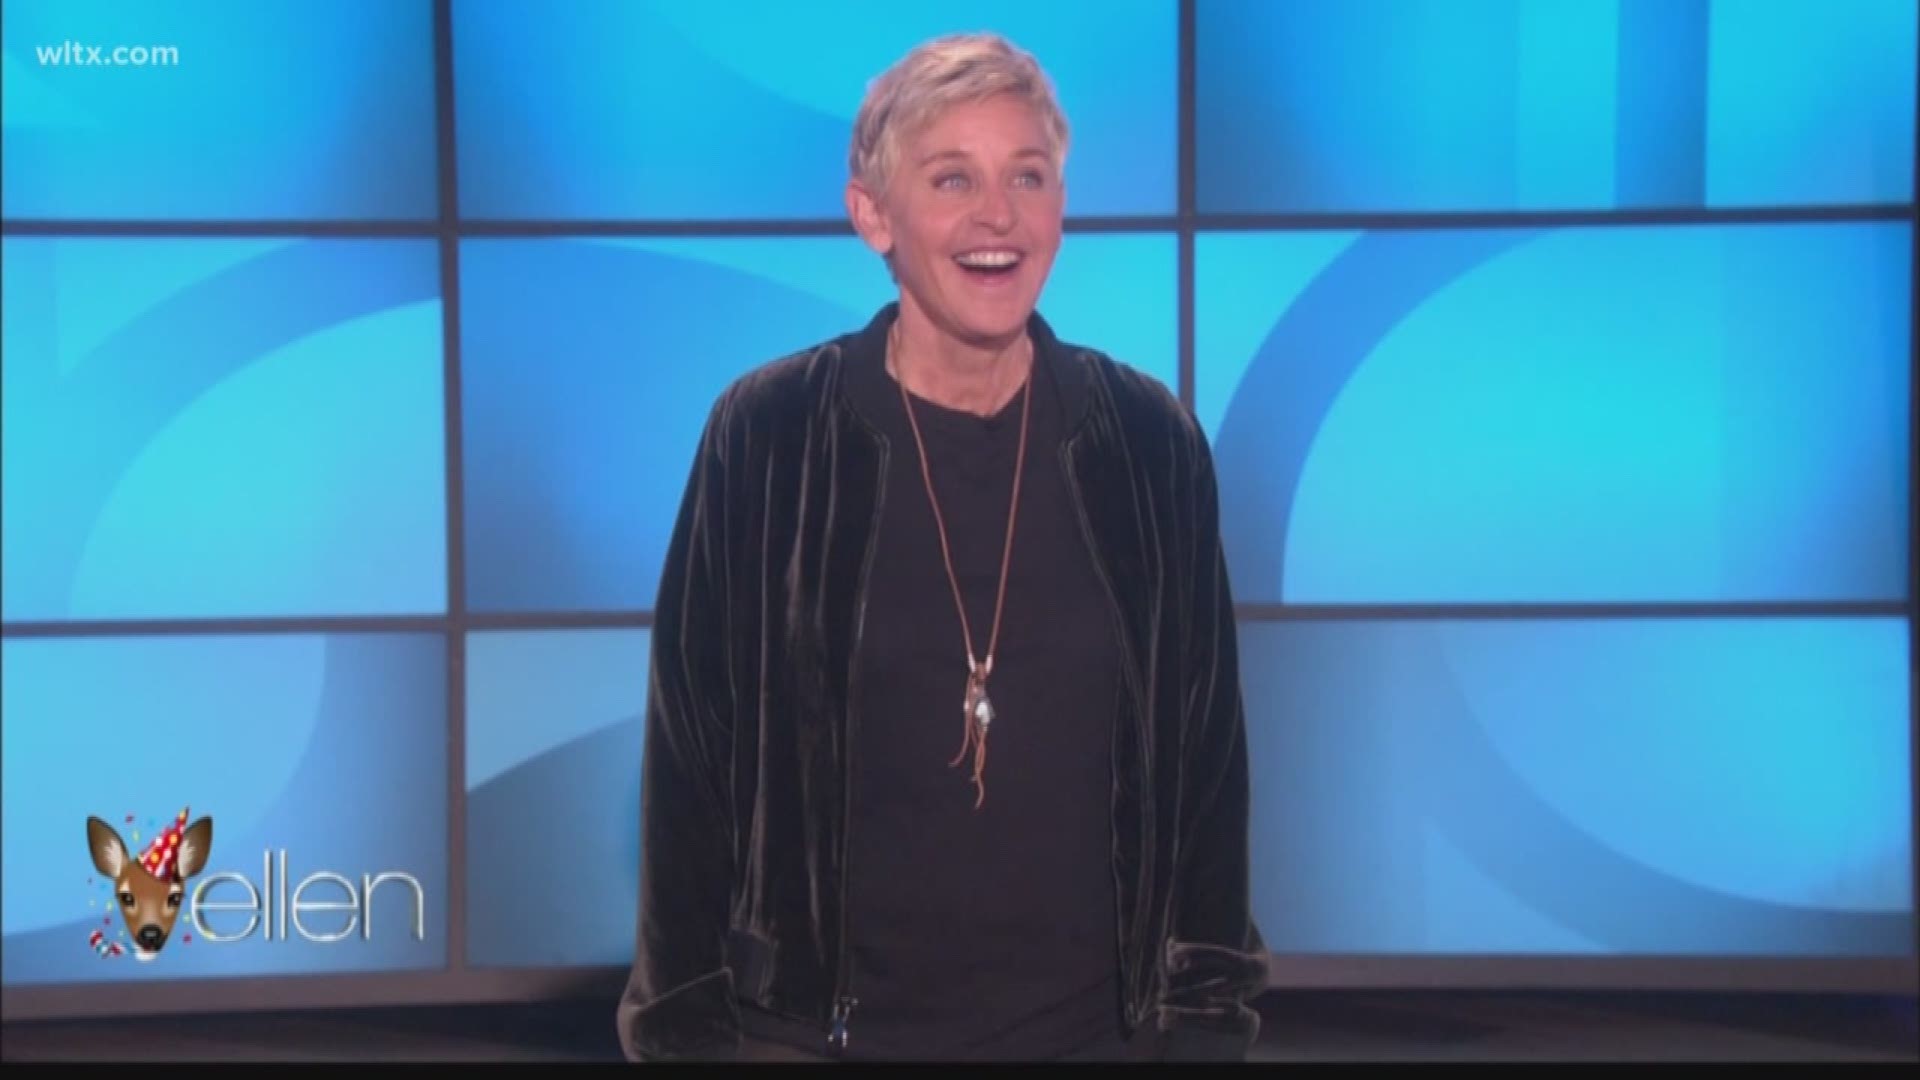 Ellen's contract ends in 2020. The show debuted back in 2003 and has won 57 daytime Emmy awards.